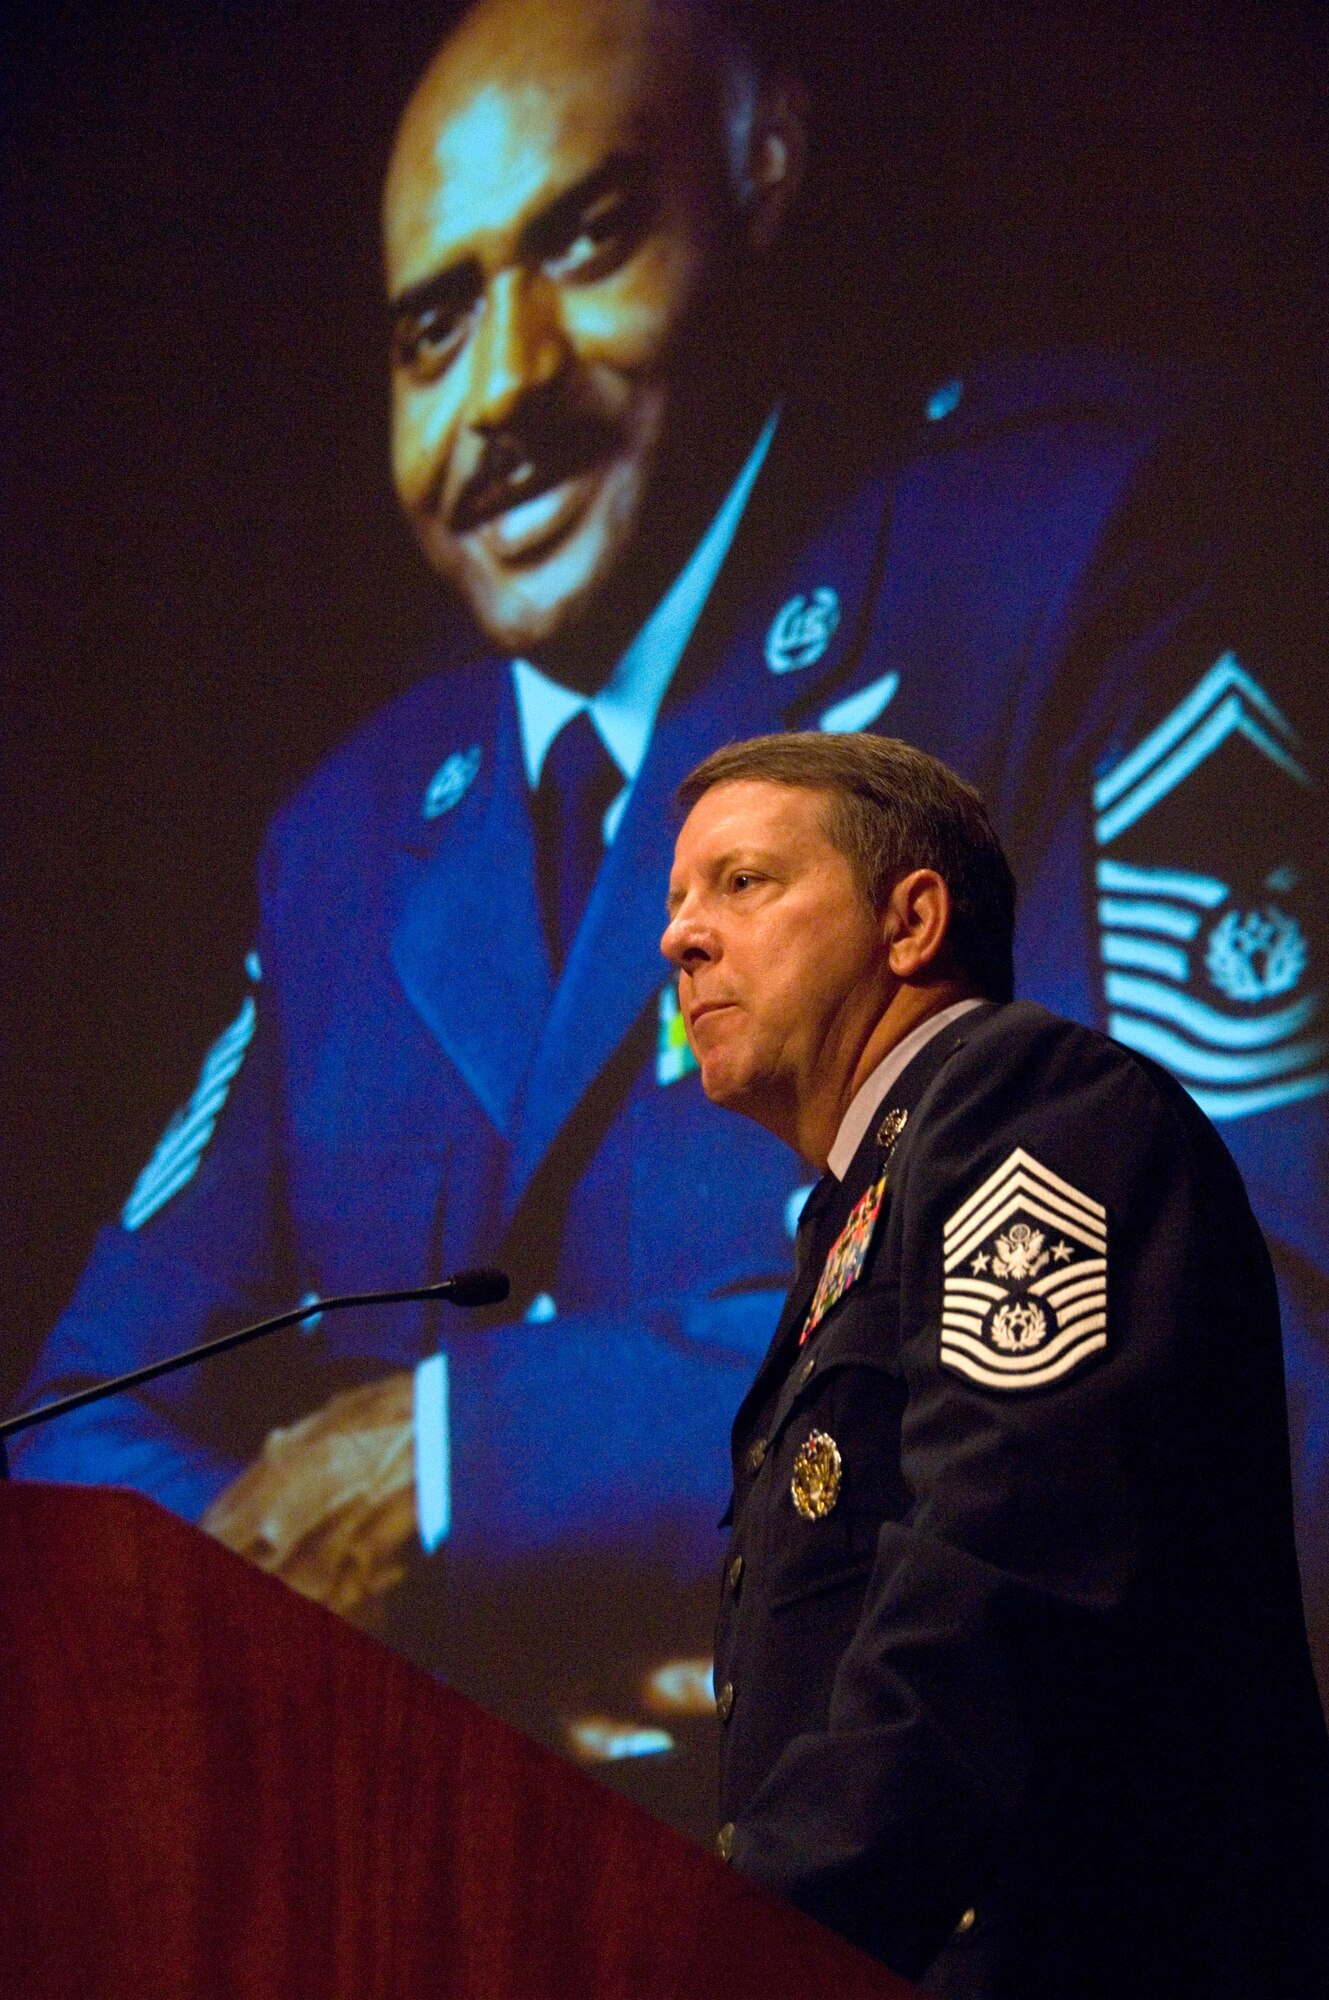 Chief Master Sgt. of the Air Force Rodney J. McKinley speaks at the dedication ceremony of the Thomas N. Barnes Center for Enlisted Education here July 24.  (Air Force photo by Melanie Rodgers)